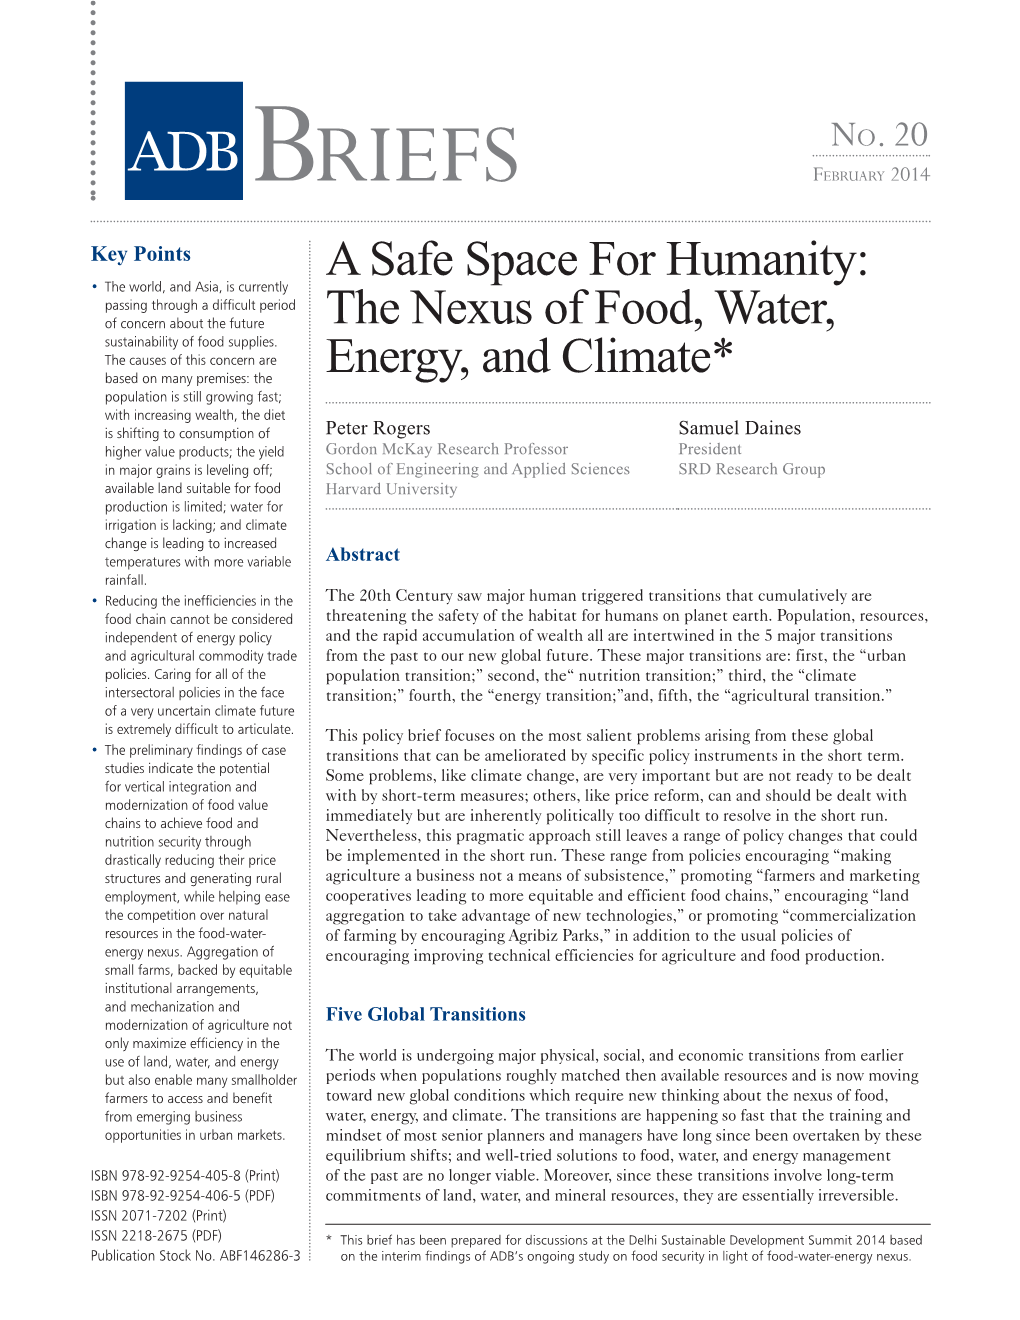 A Safe Space for Humanity: the Nexus of Food, Water, Energy, and Climate 3